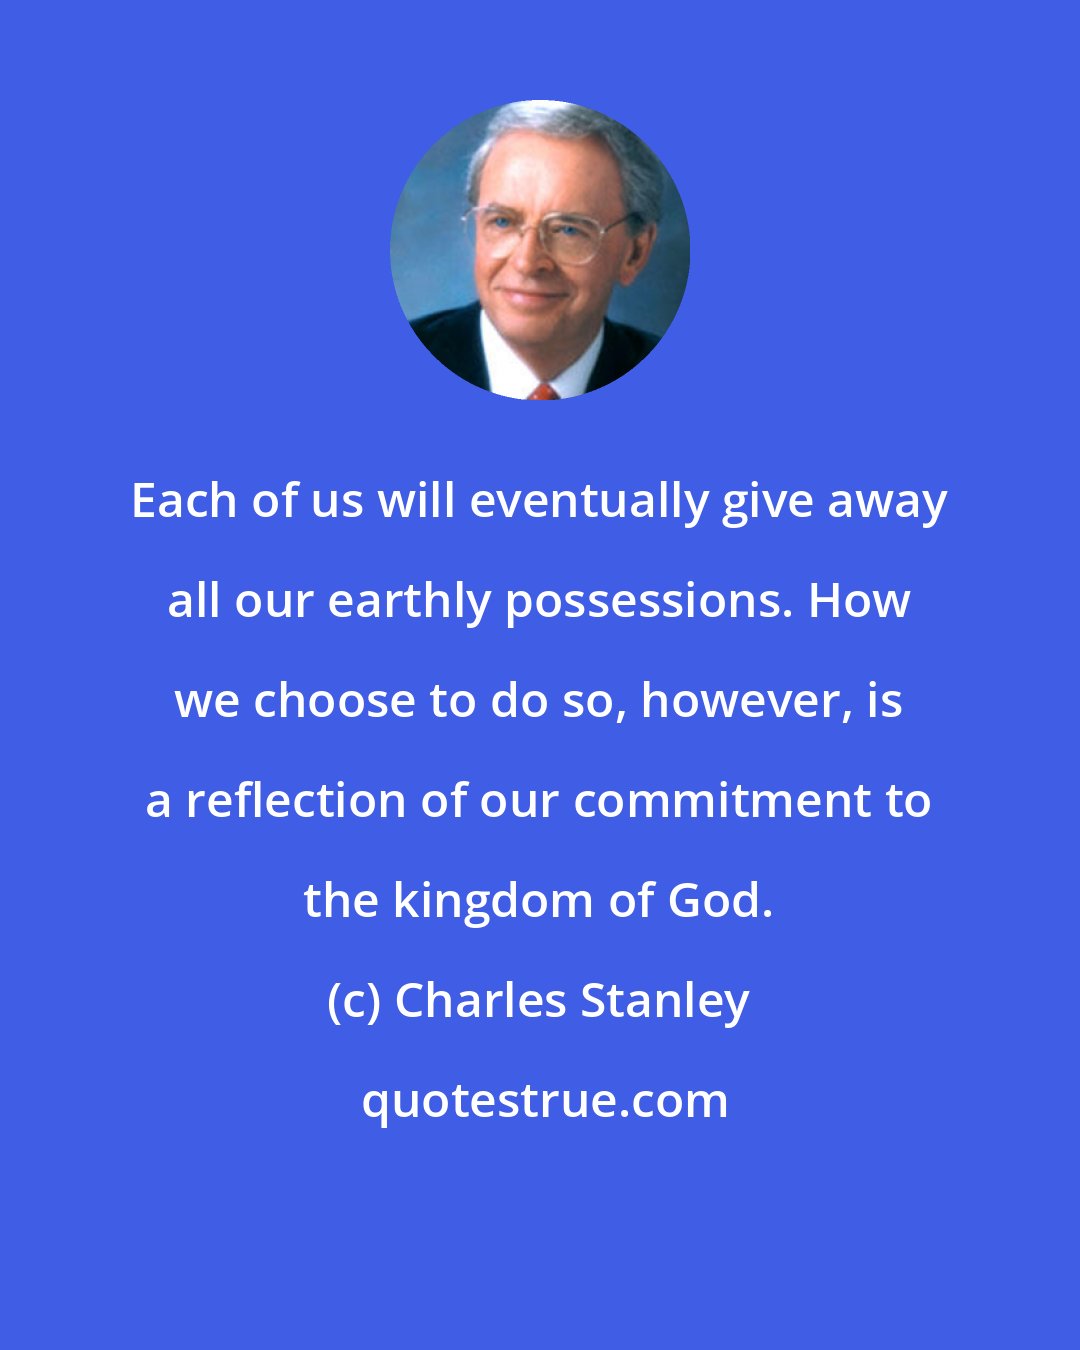 Charles Stanley: Each of us will eventually give away all our earthly possessions. How we choose to do so, however, is a reflection of our commitment to the kingdom of God.